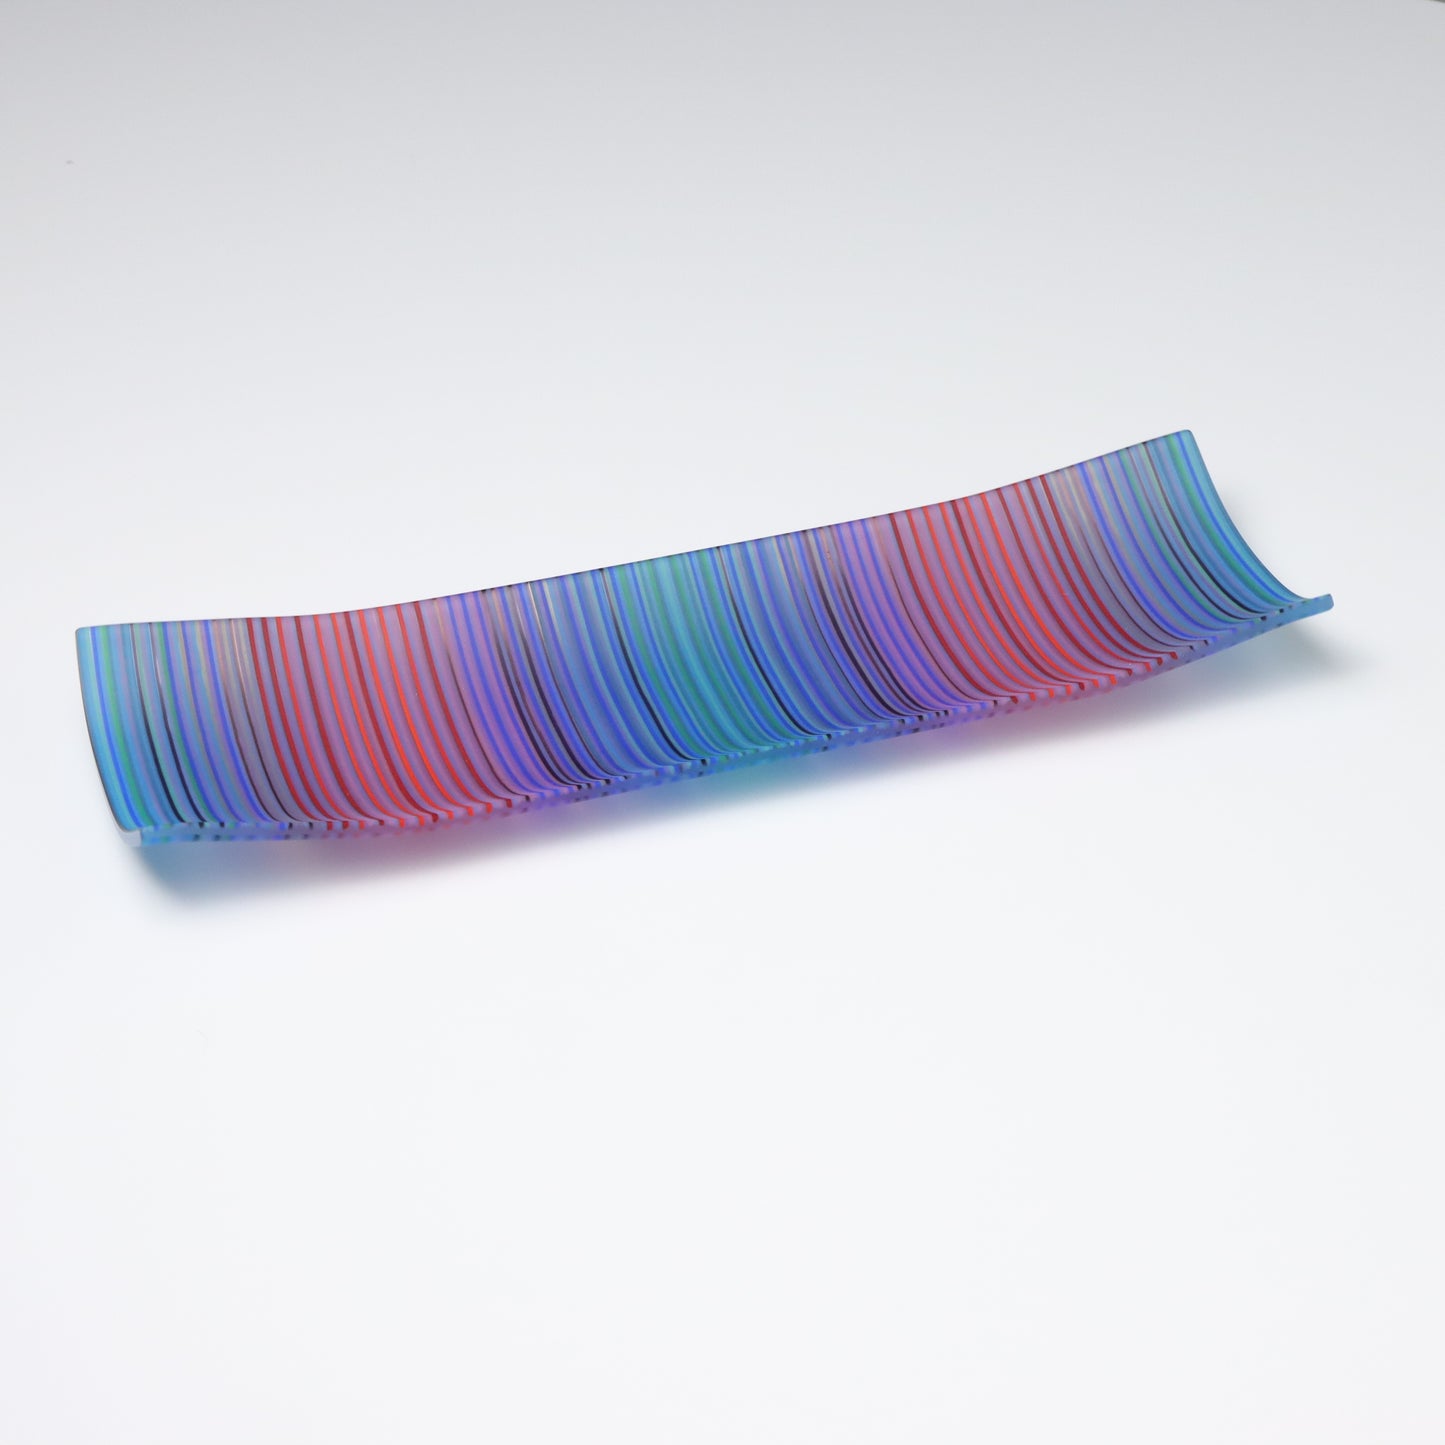 S282 | Rectangular Shaped ColourWave Glass Plate | Teal, Blue, Purple and Pink